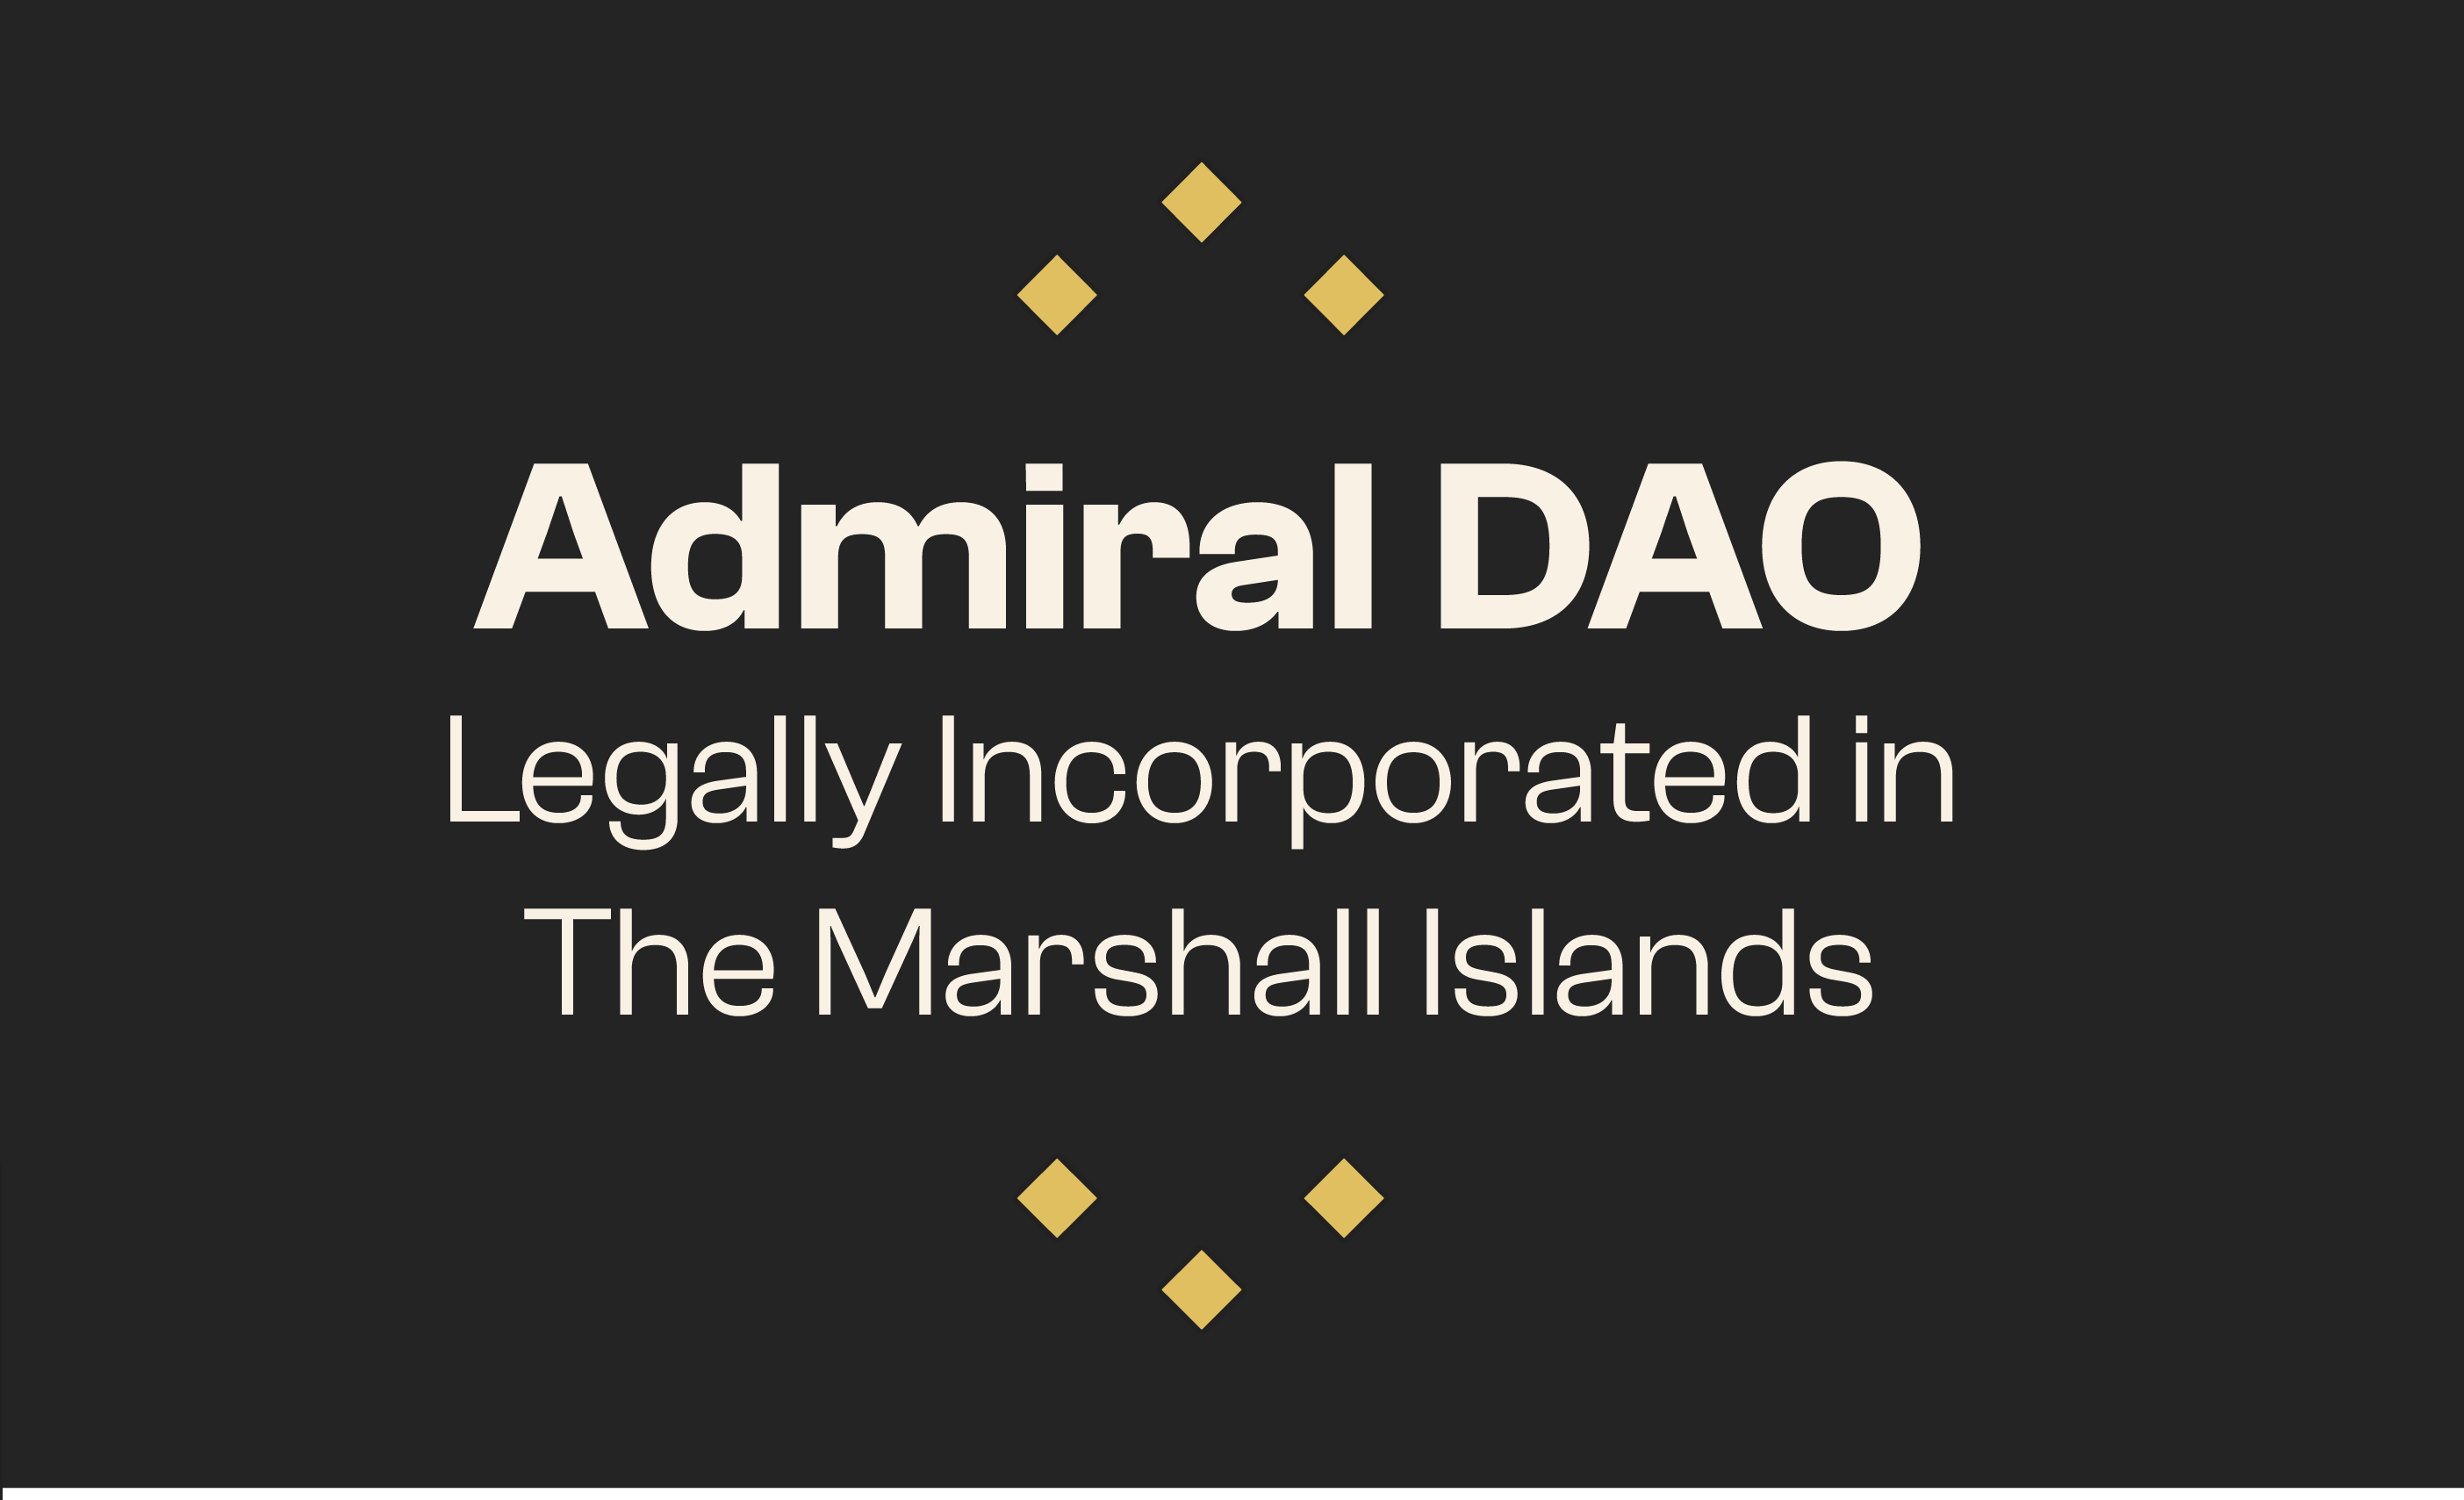 Shipyard’s “Admiral DAO” is Now Legally Incorporated in The Marshall Islands!